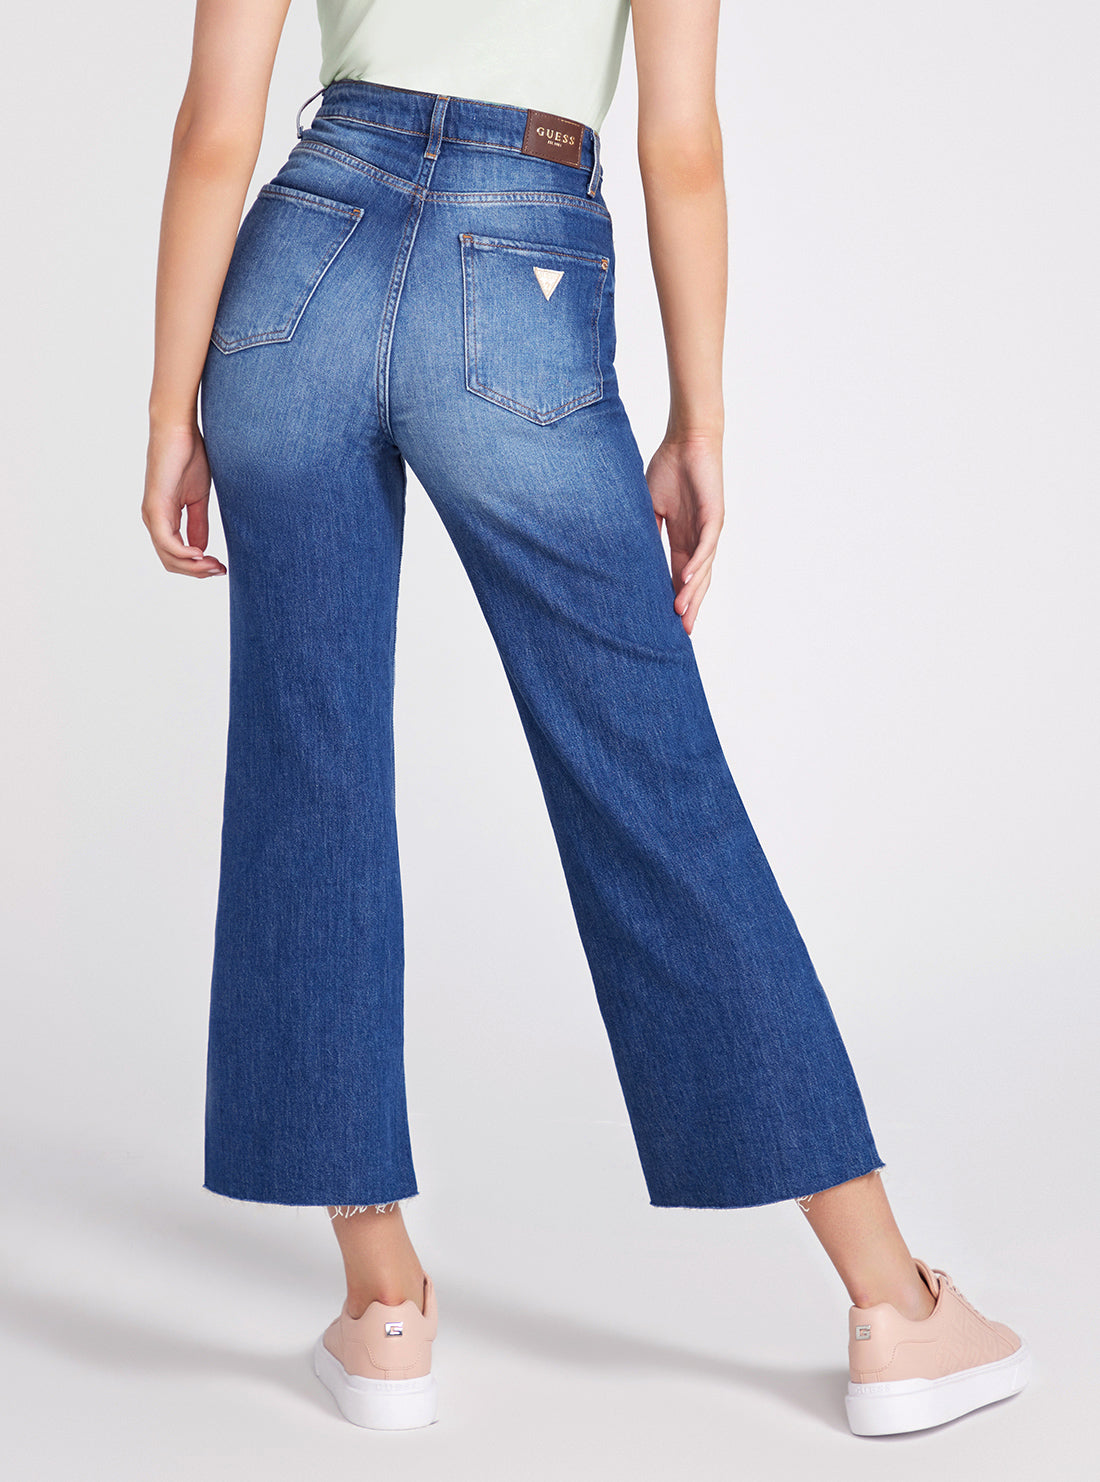 High-Rise Ankle Wide Leg Denim Jeans In Feel Free Wash | GUESS Women's Denim | back view